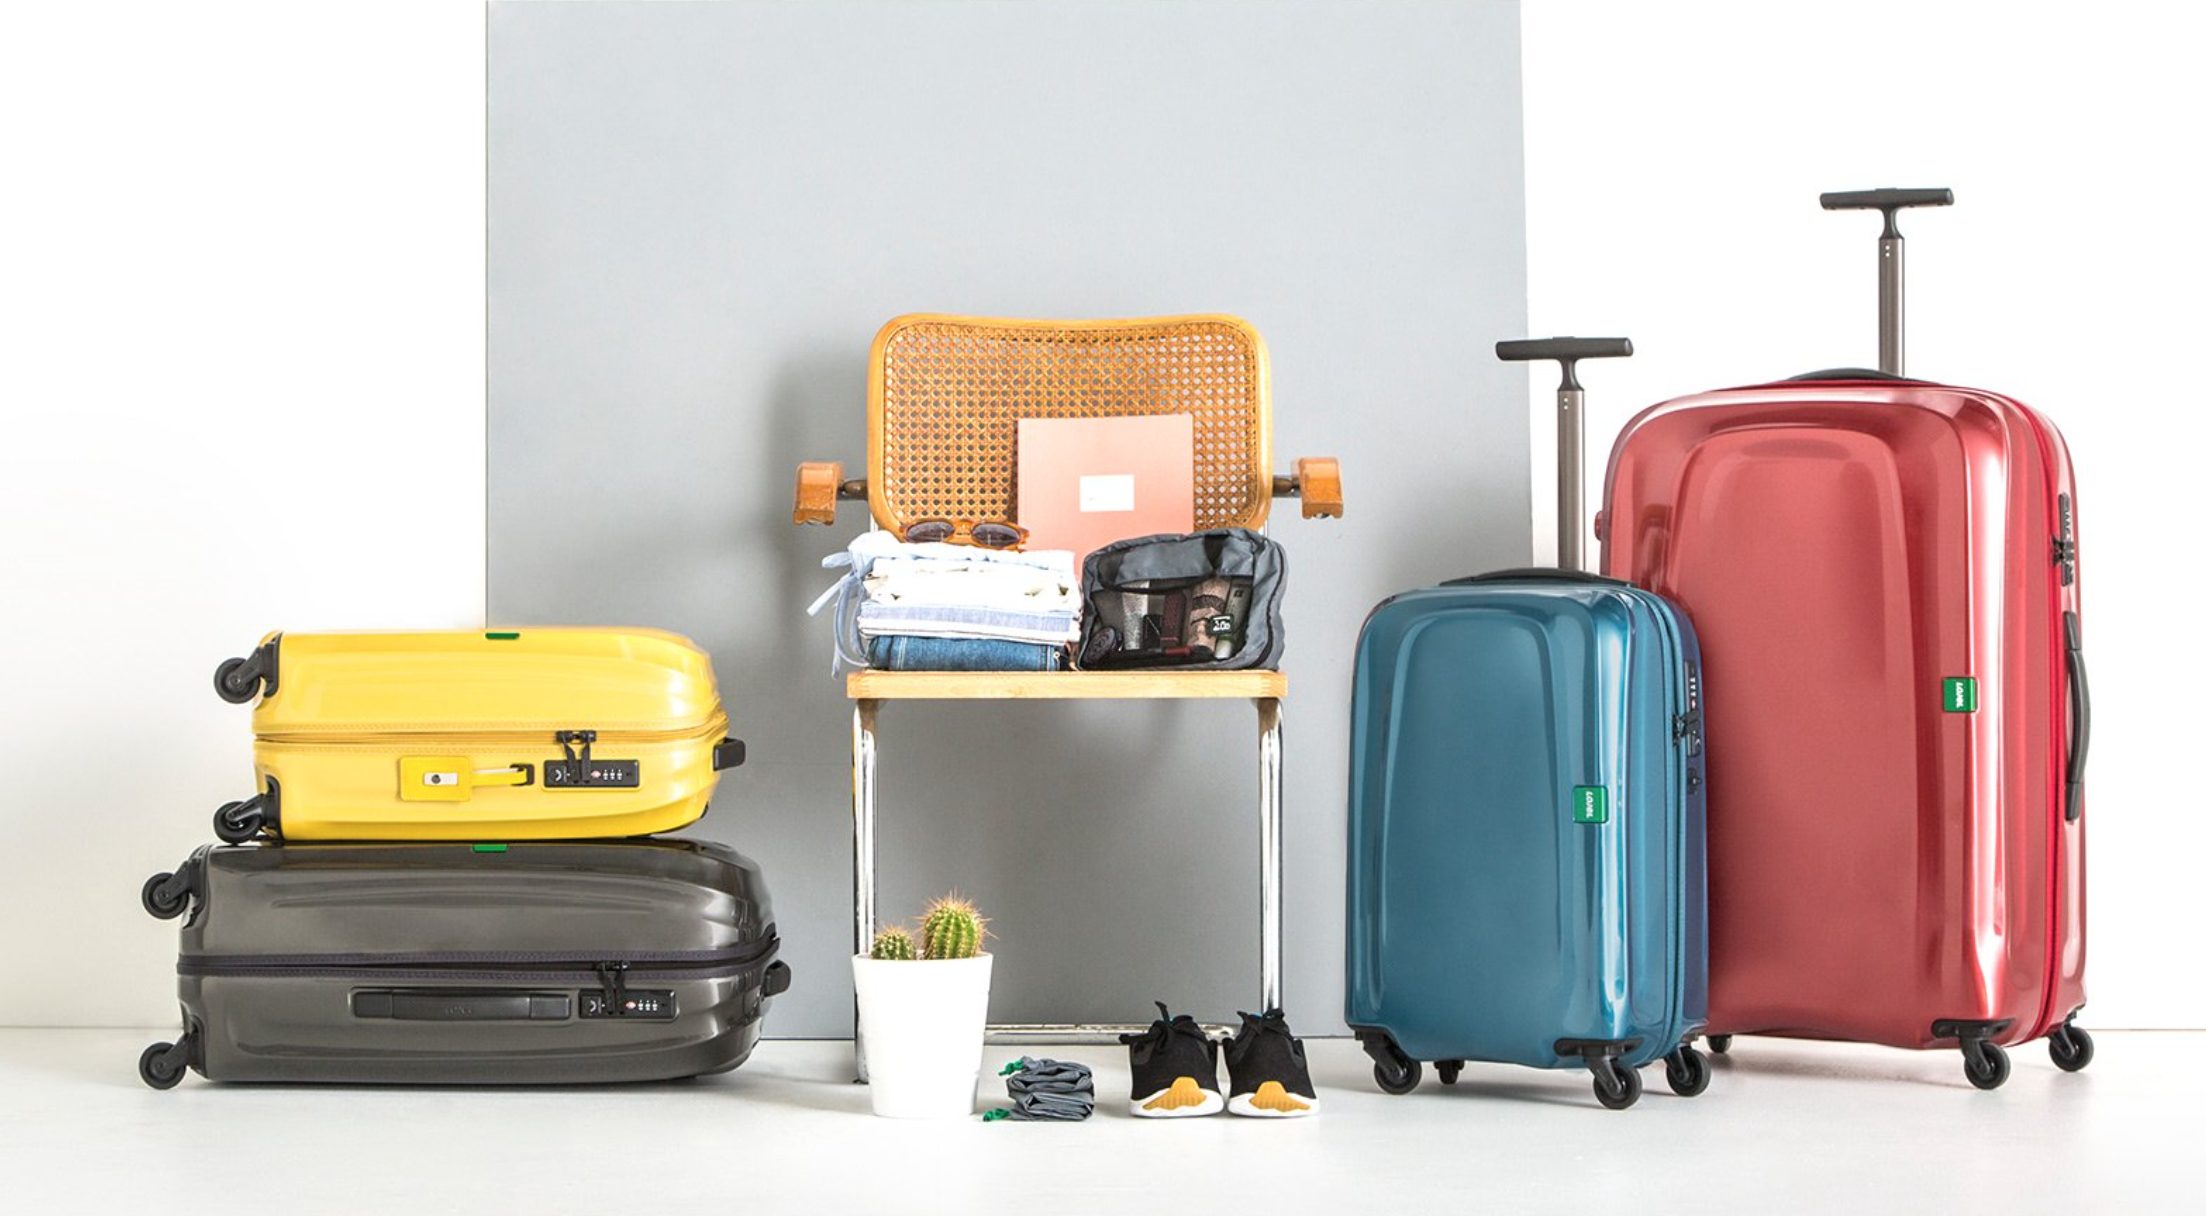 Is this the best luggage on the market?